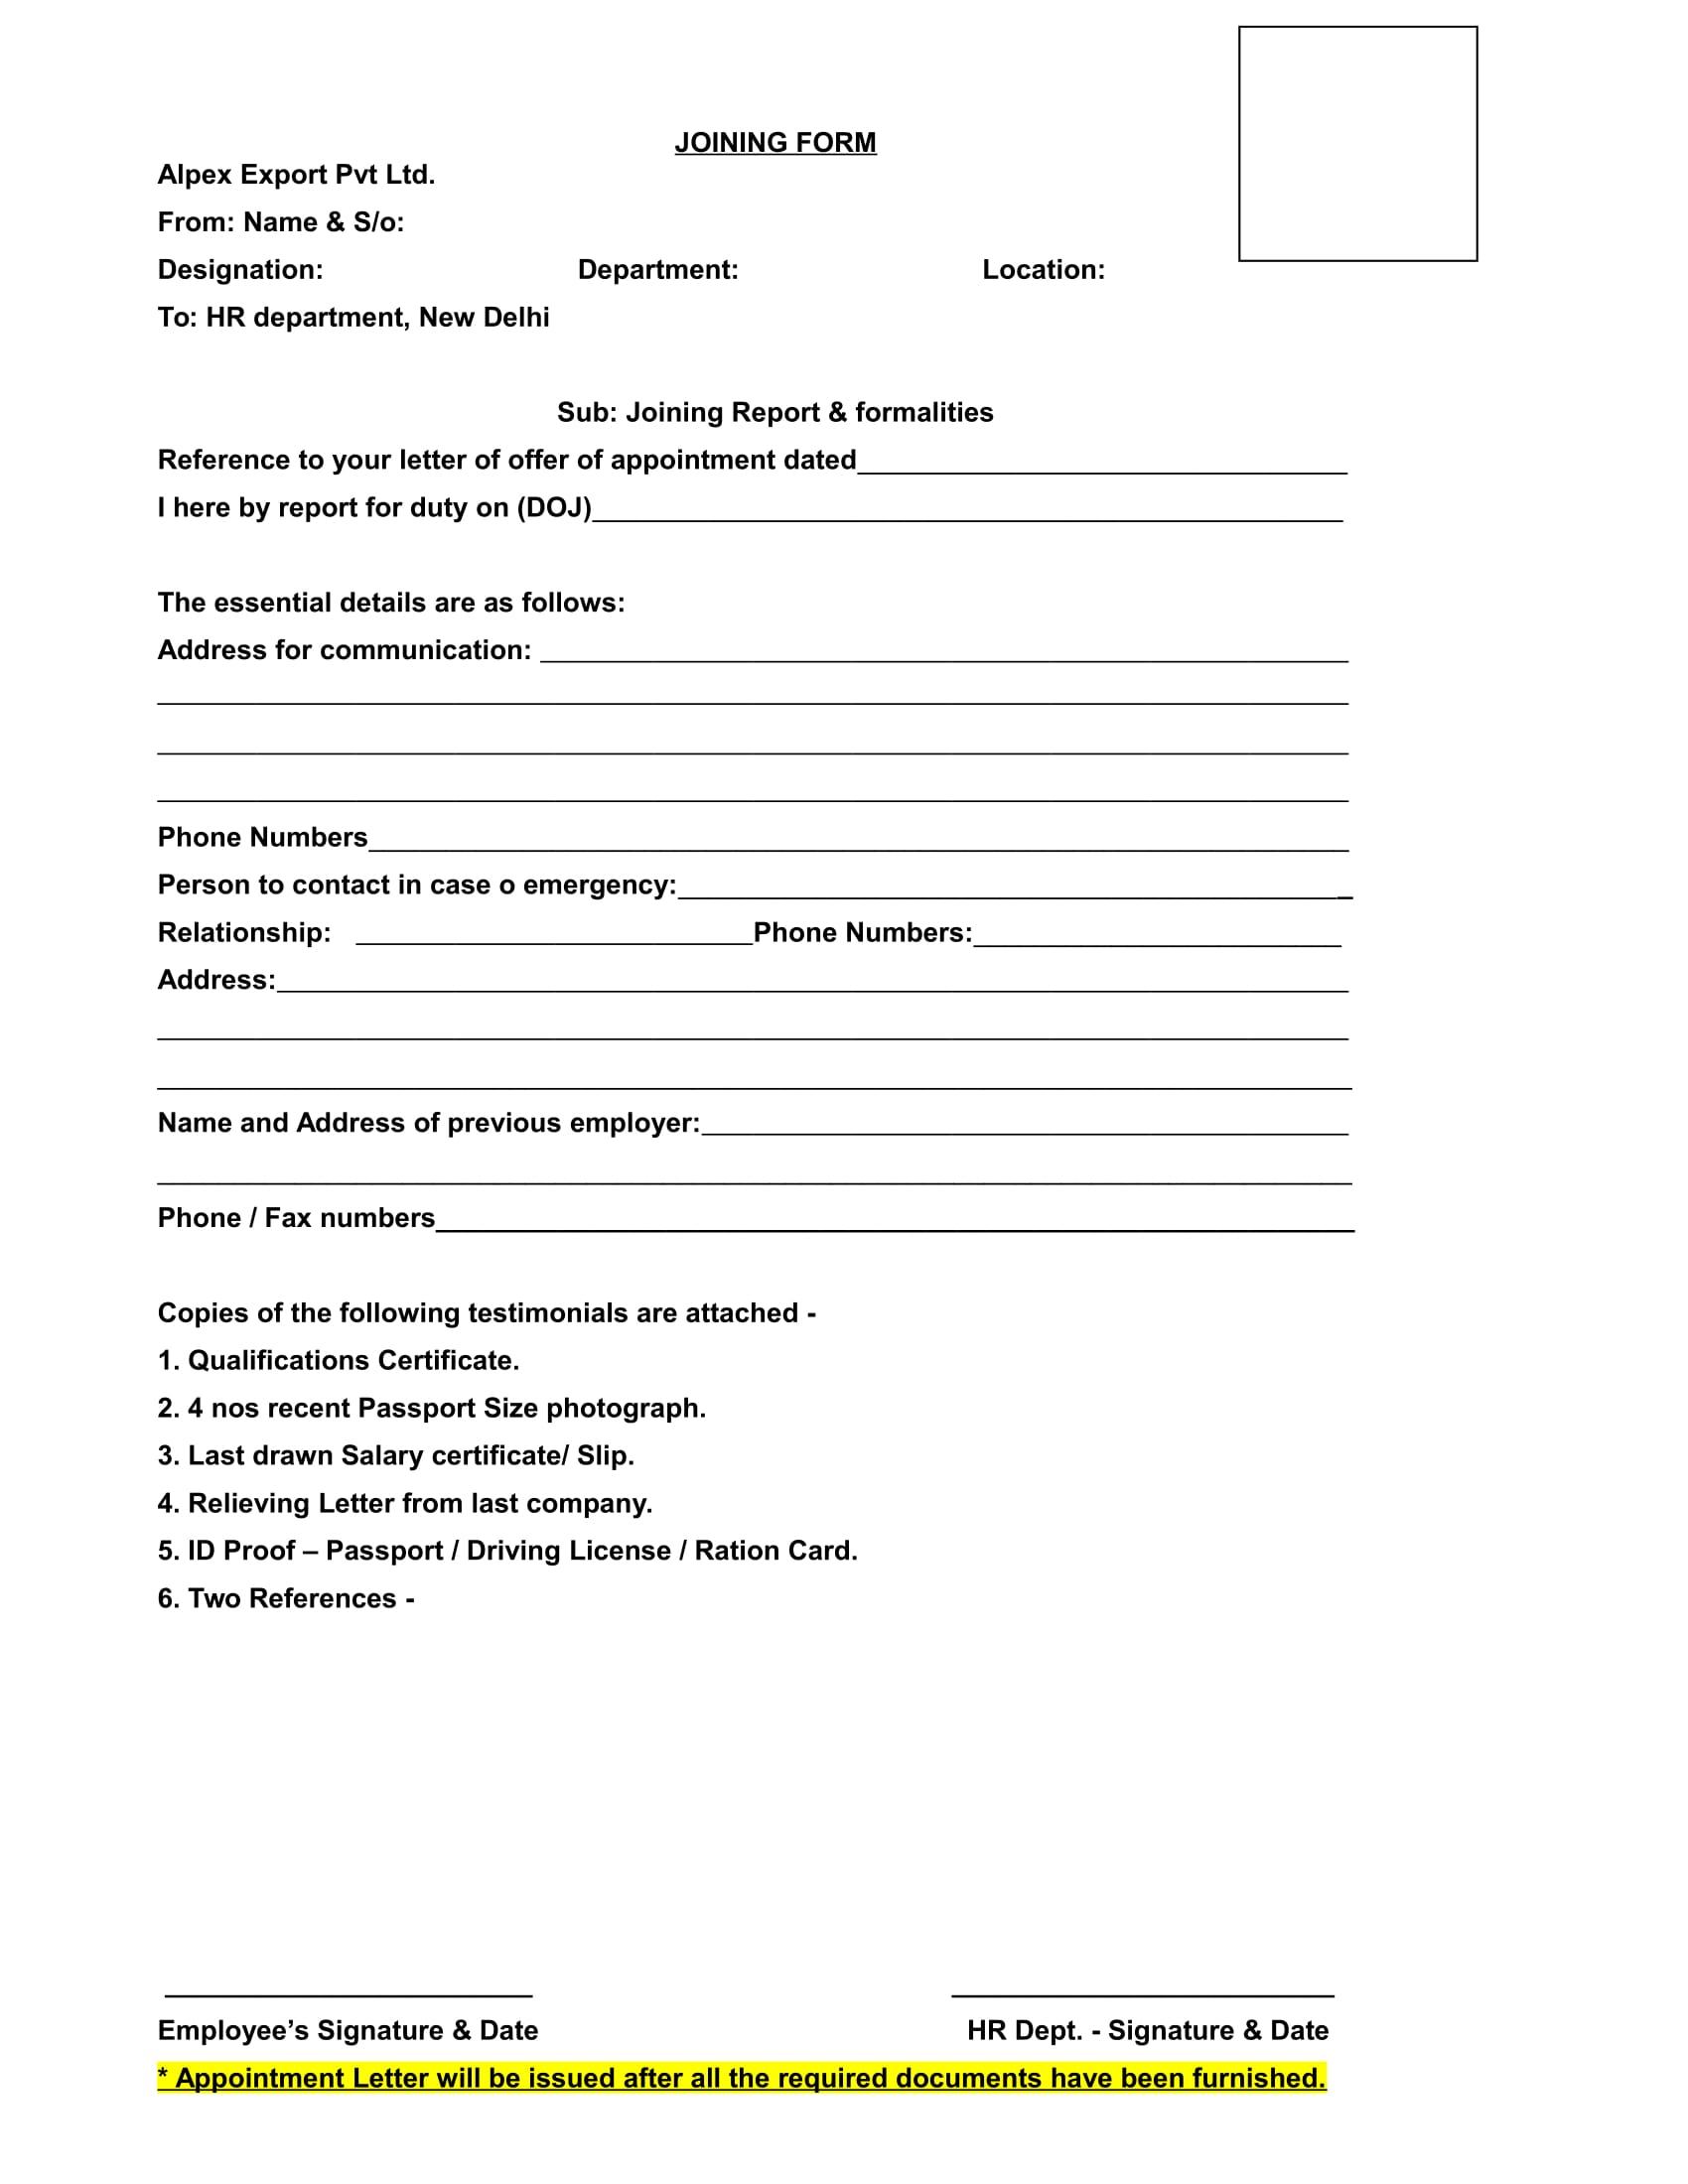 joining report form sample in doc 1